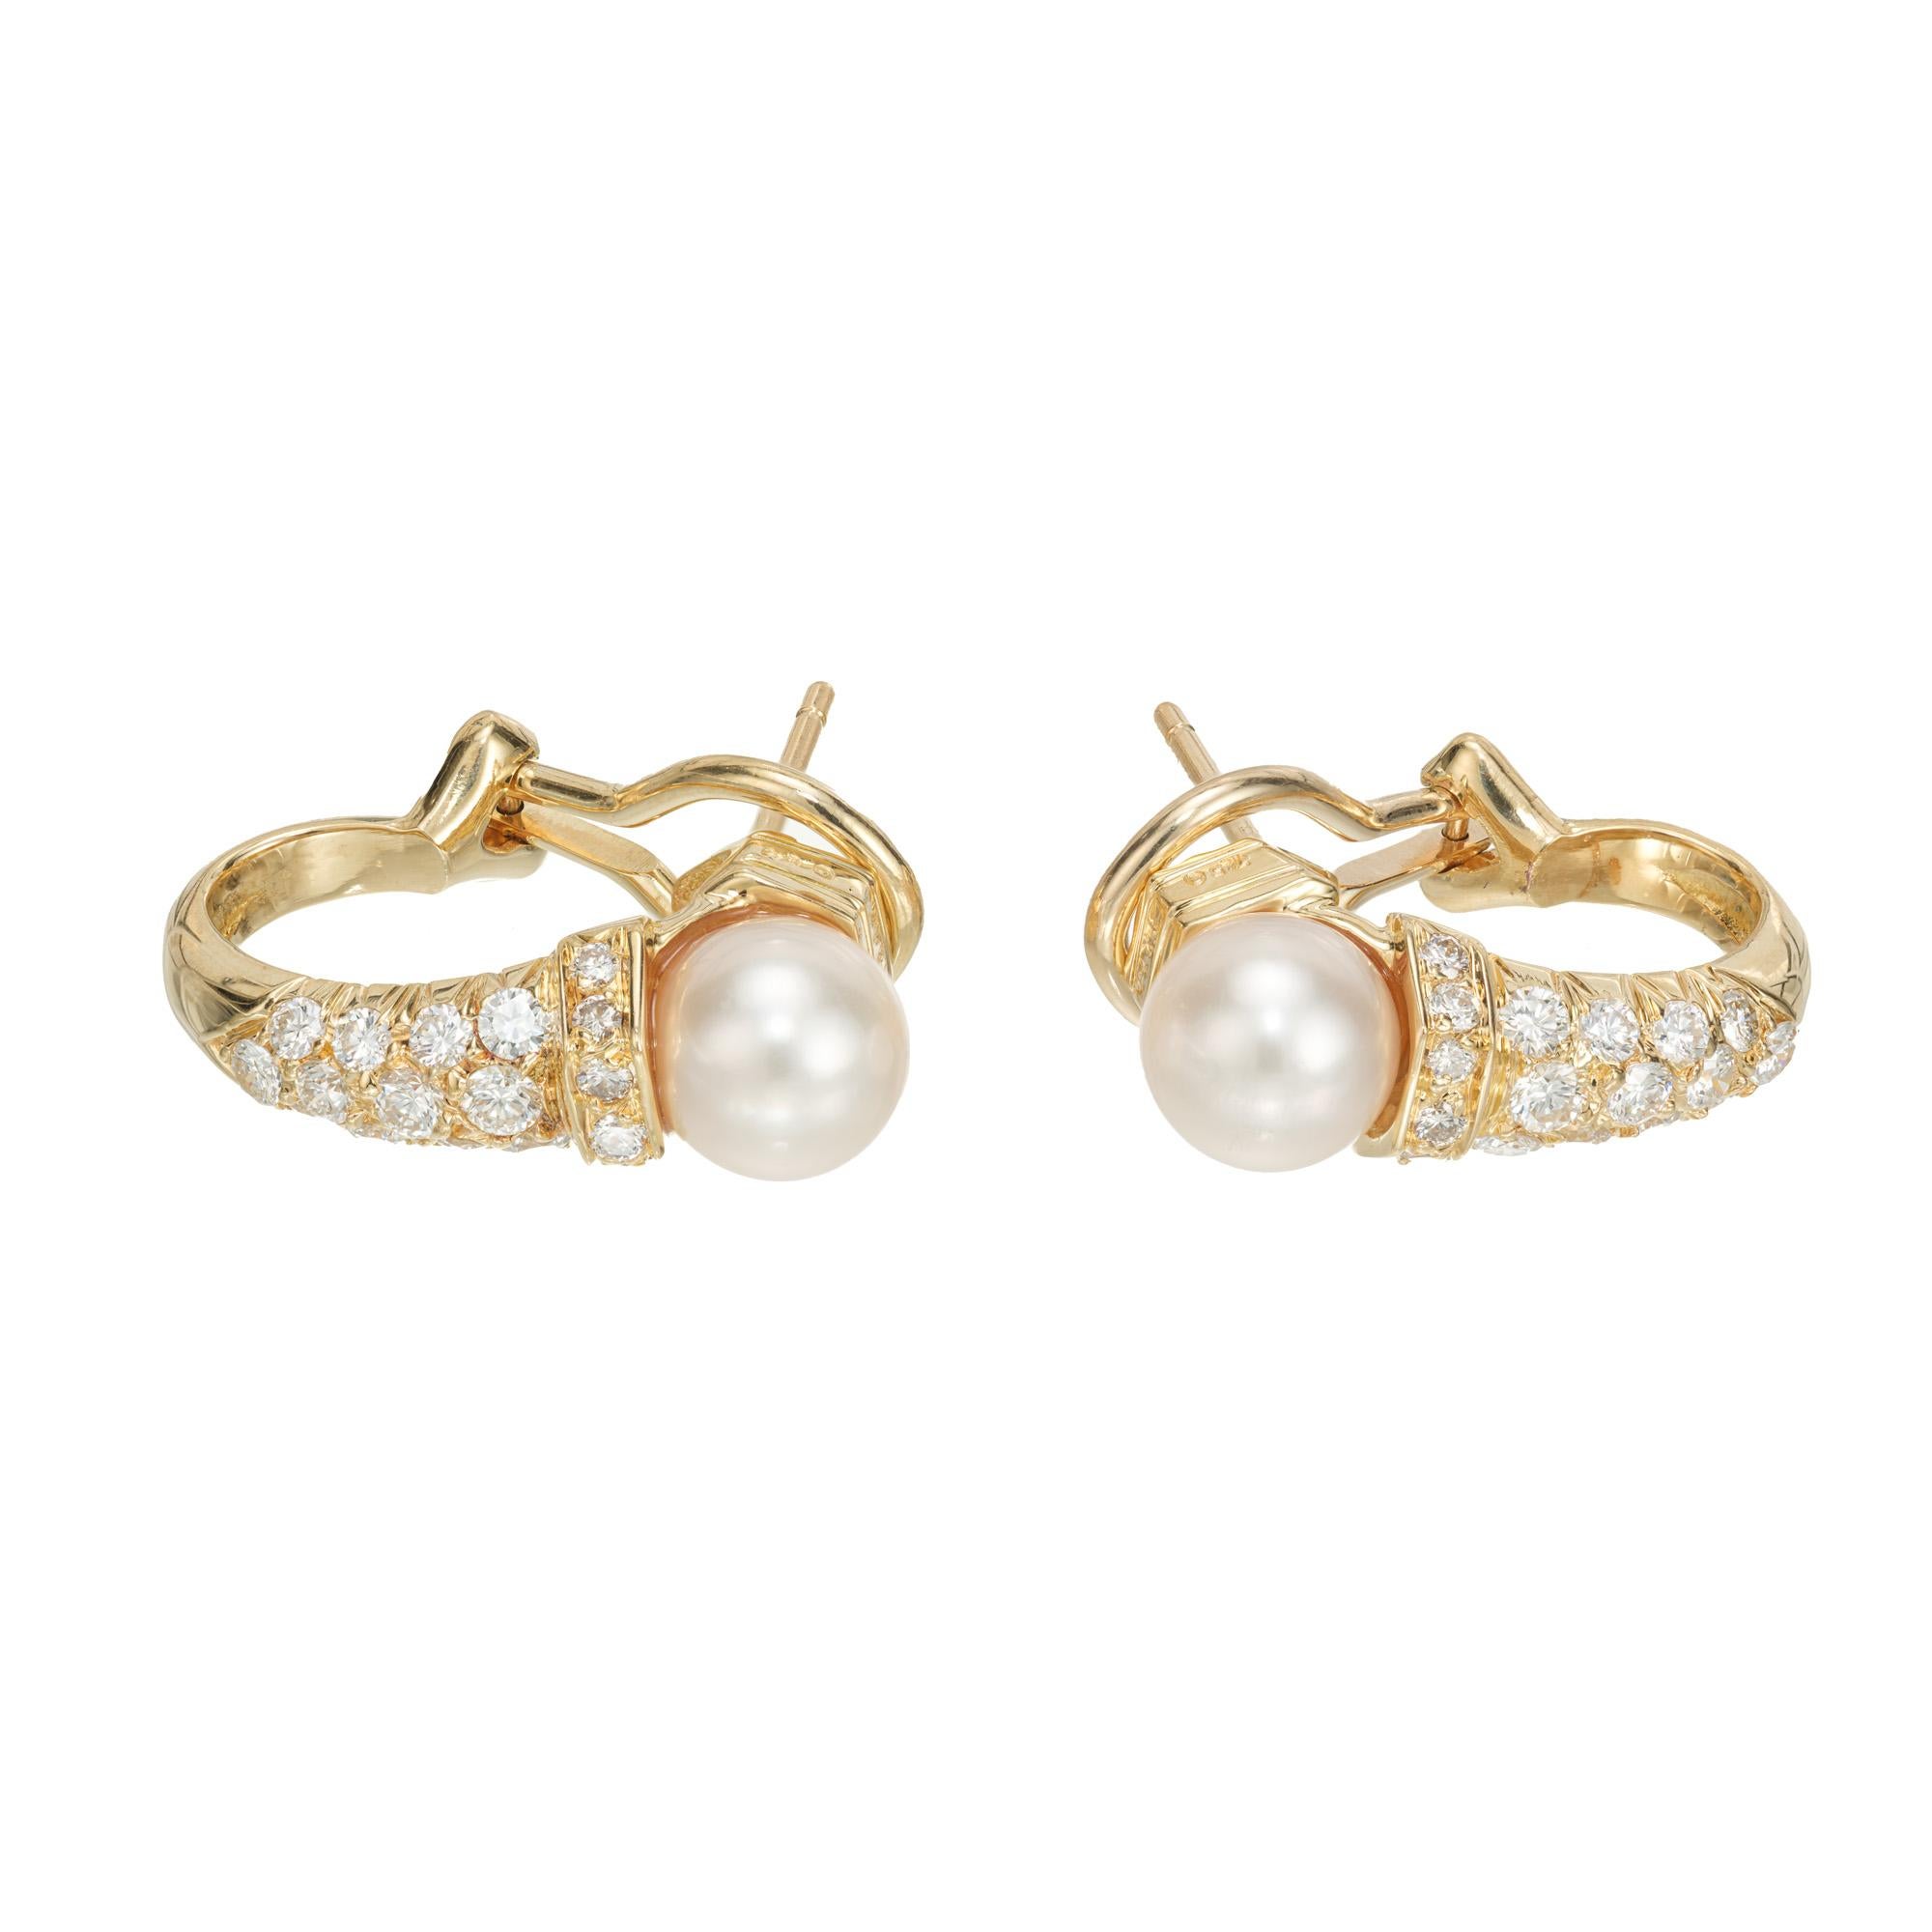 Tiffany & Co clip post pearl and diamond earrings. 2 cultured rose hue pears, set in 18k yellow gold semi hoop settings with 36 round brilliant cut accent diamonds. Both posts stamped T+Co.

2 cultured rose pearls, 7mm
36 round brilliant cut